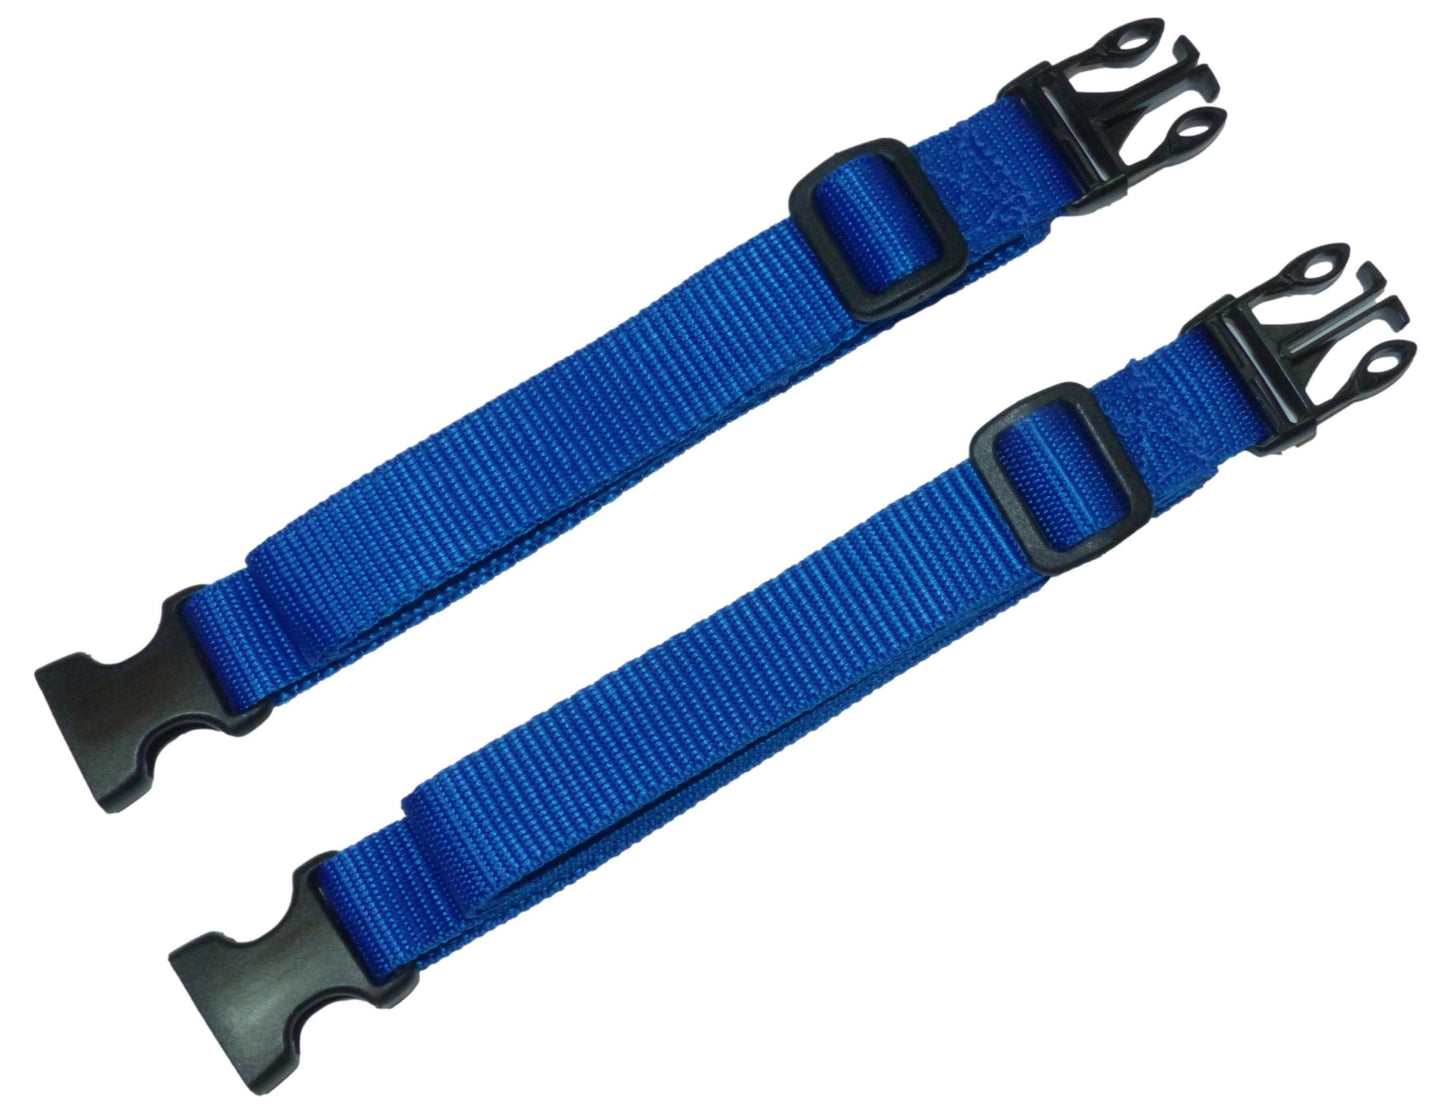 25mm Webbing Strap with Quick Release & Length-Adjusting Buckles (Pair) in blue